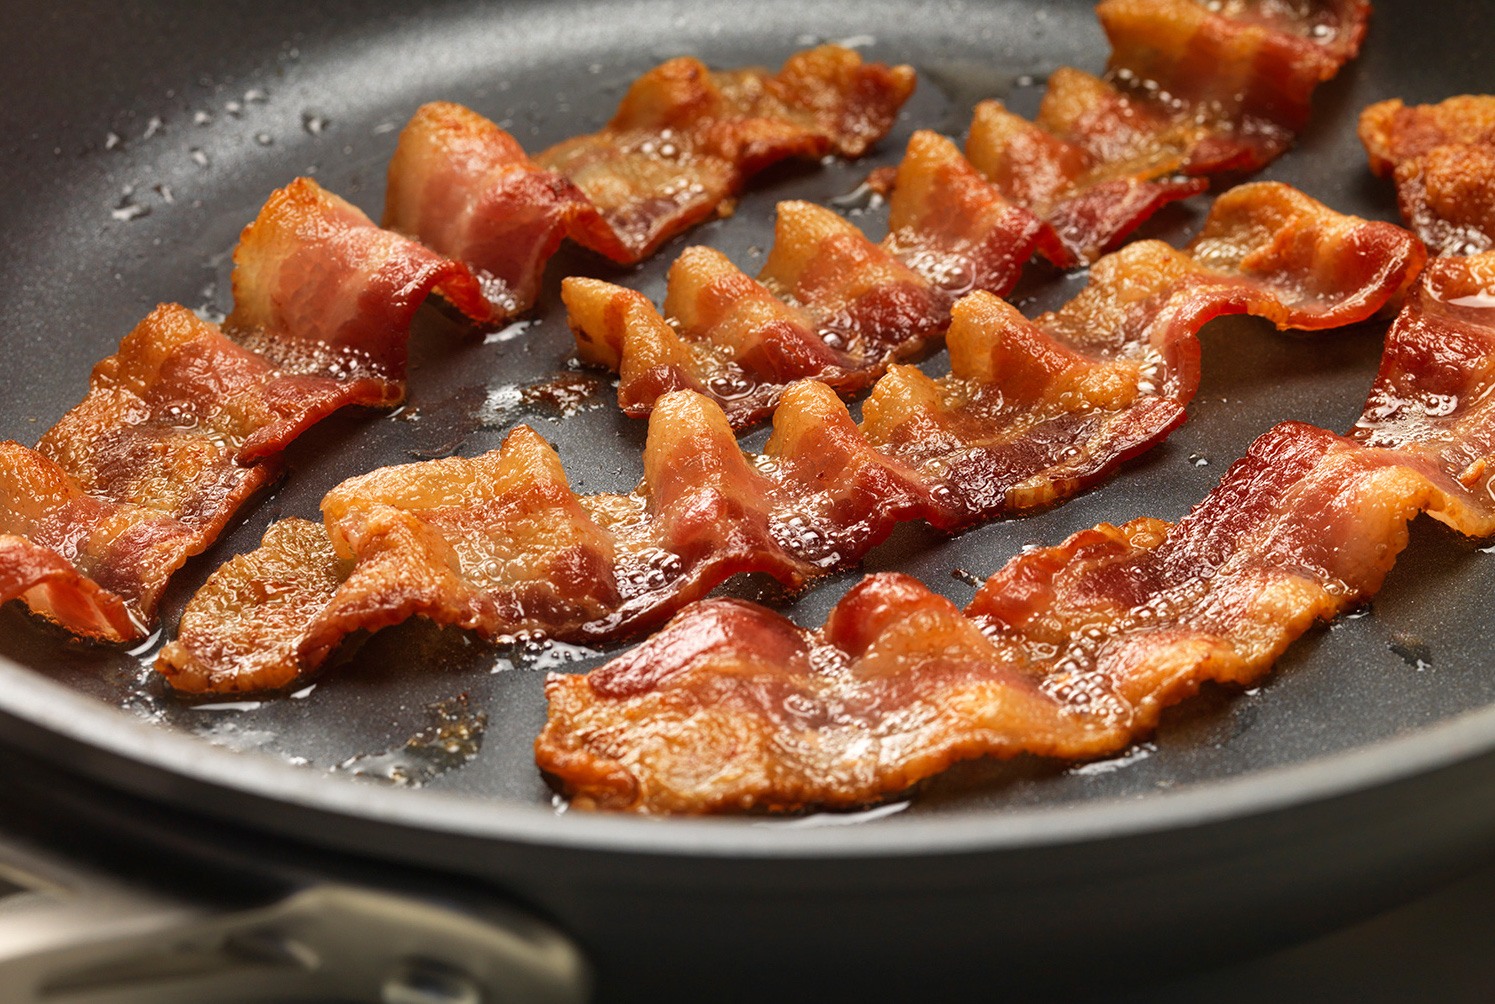 11 Infographic That Tell You All The Things About Bacon